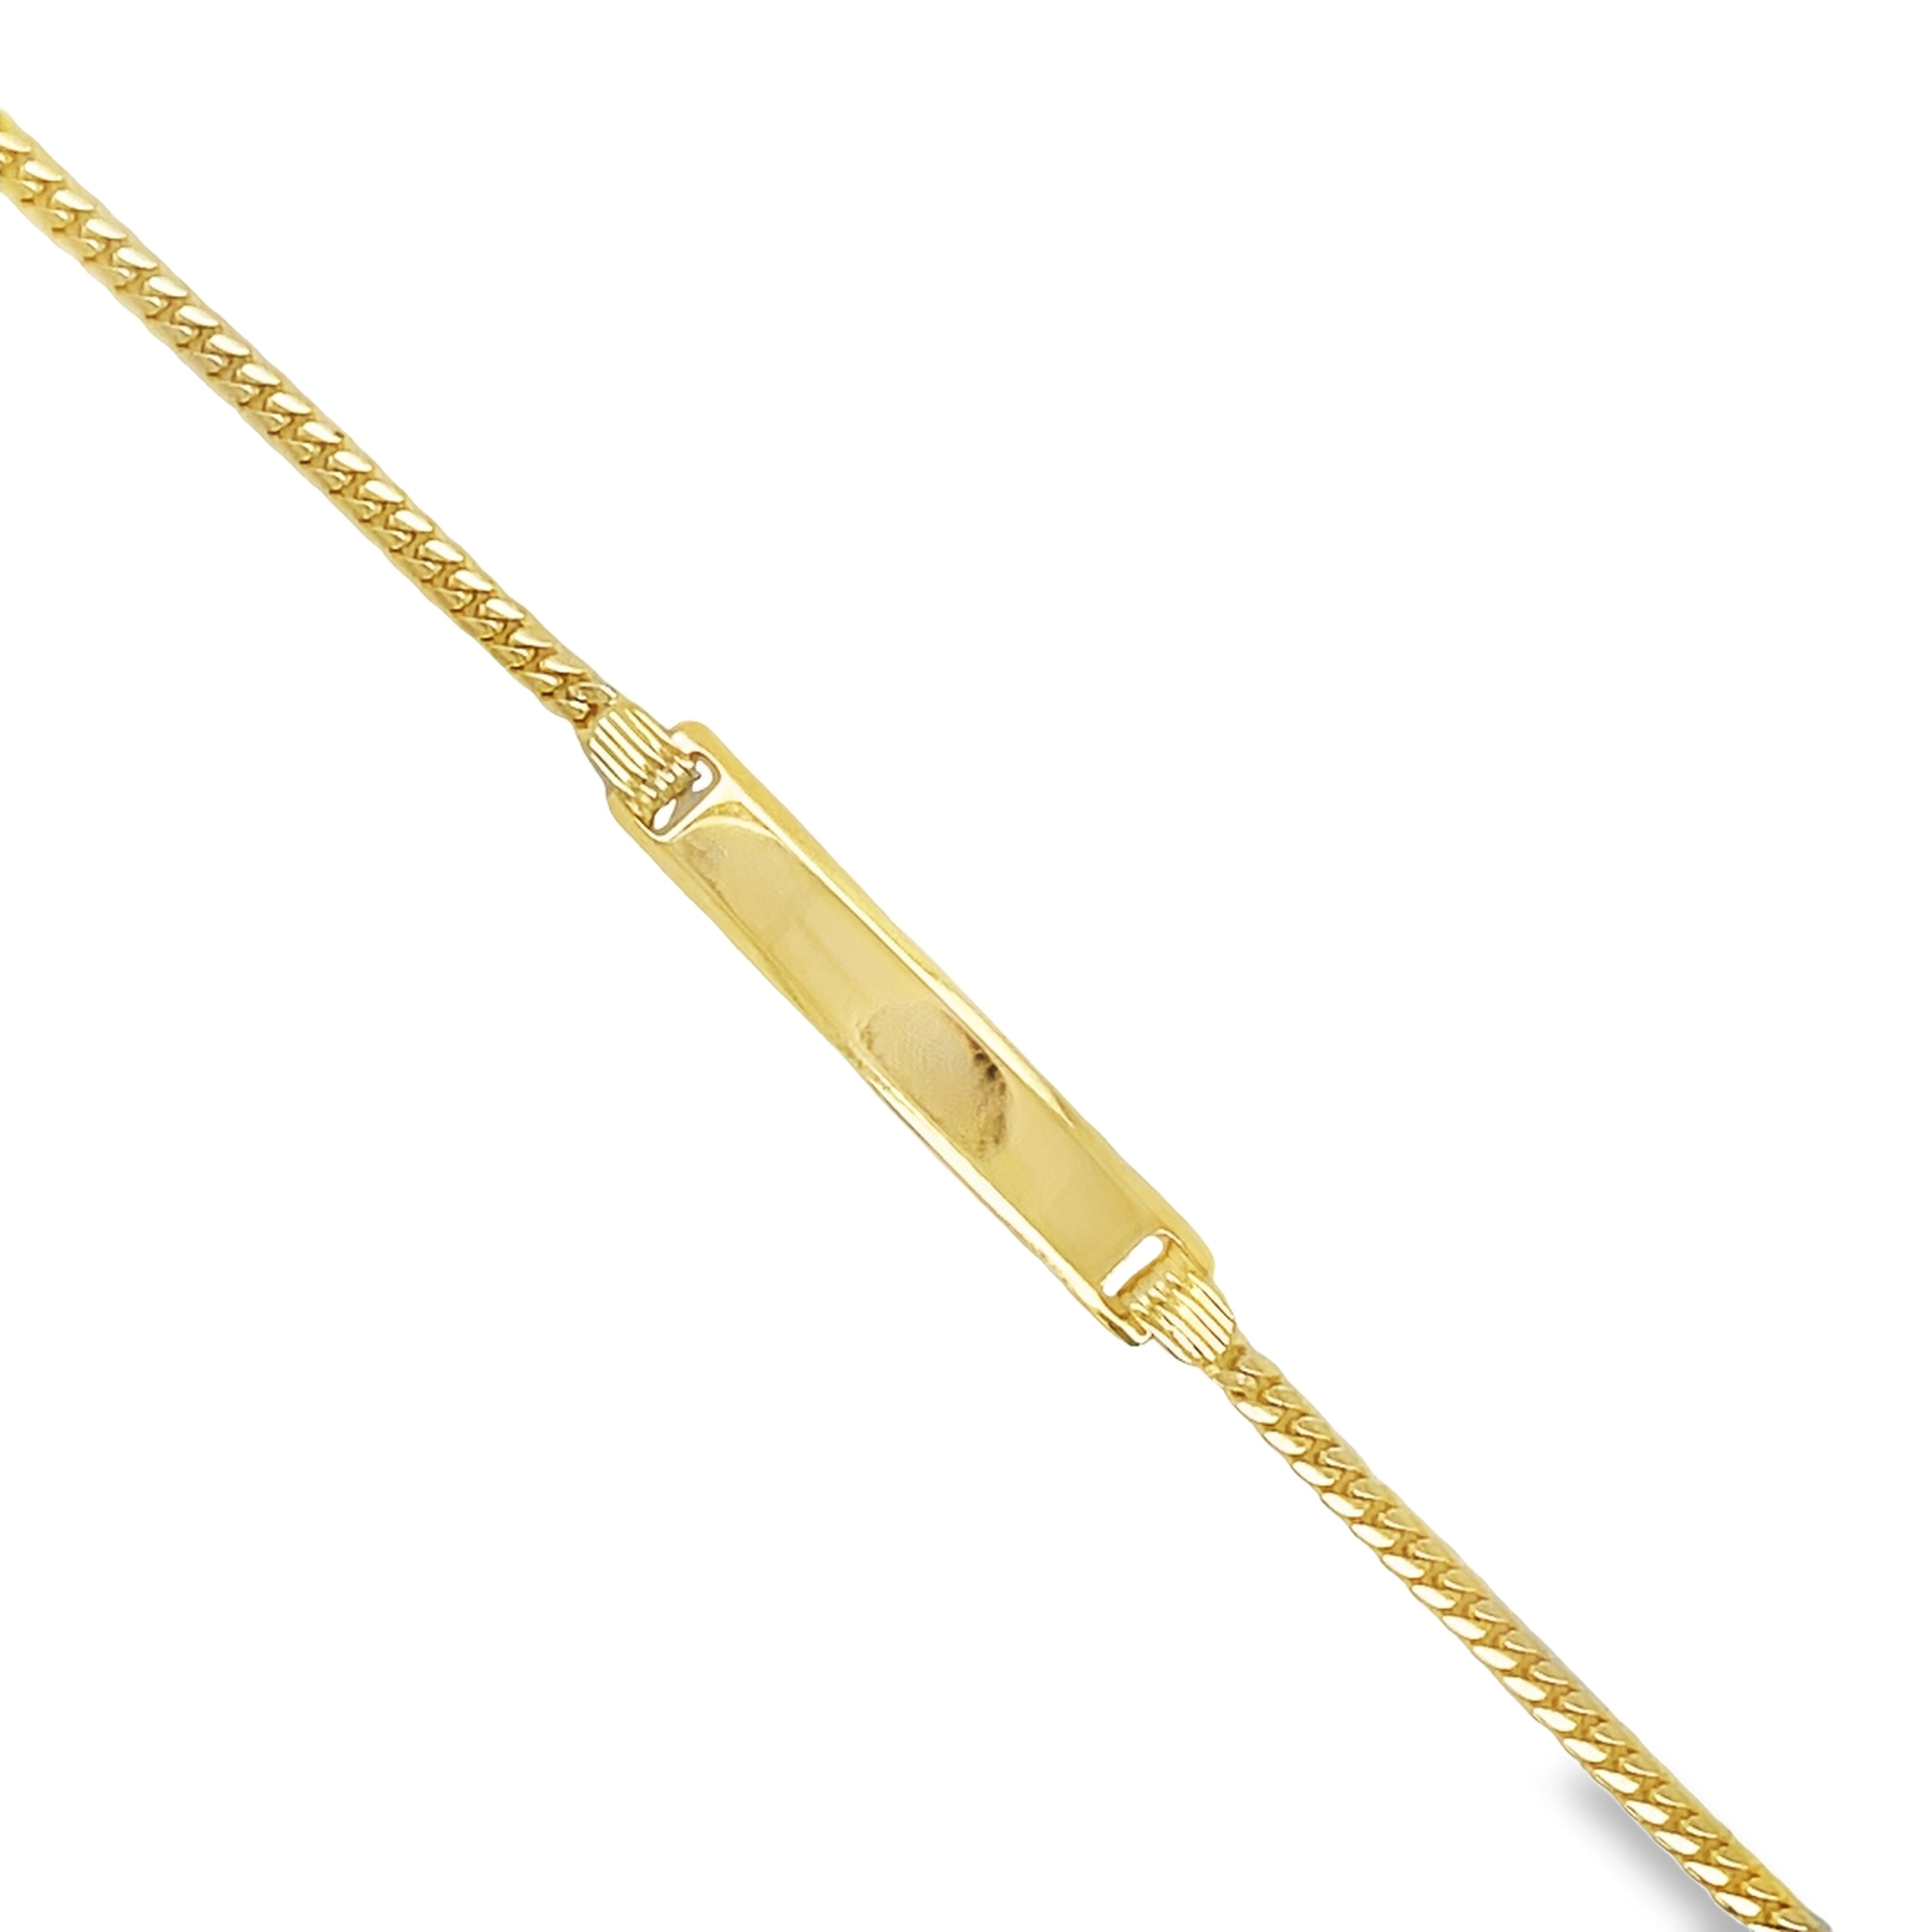 This beautiful 14k yellow gold ID bracelet is the perfect way to keep your child safe. It has a secure lobster catch and is 5.5" long – perfect for little wrists. A small ID completes this stylish look. Let your child sparkle with confidence.